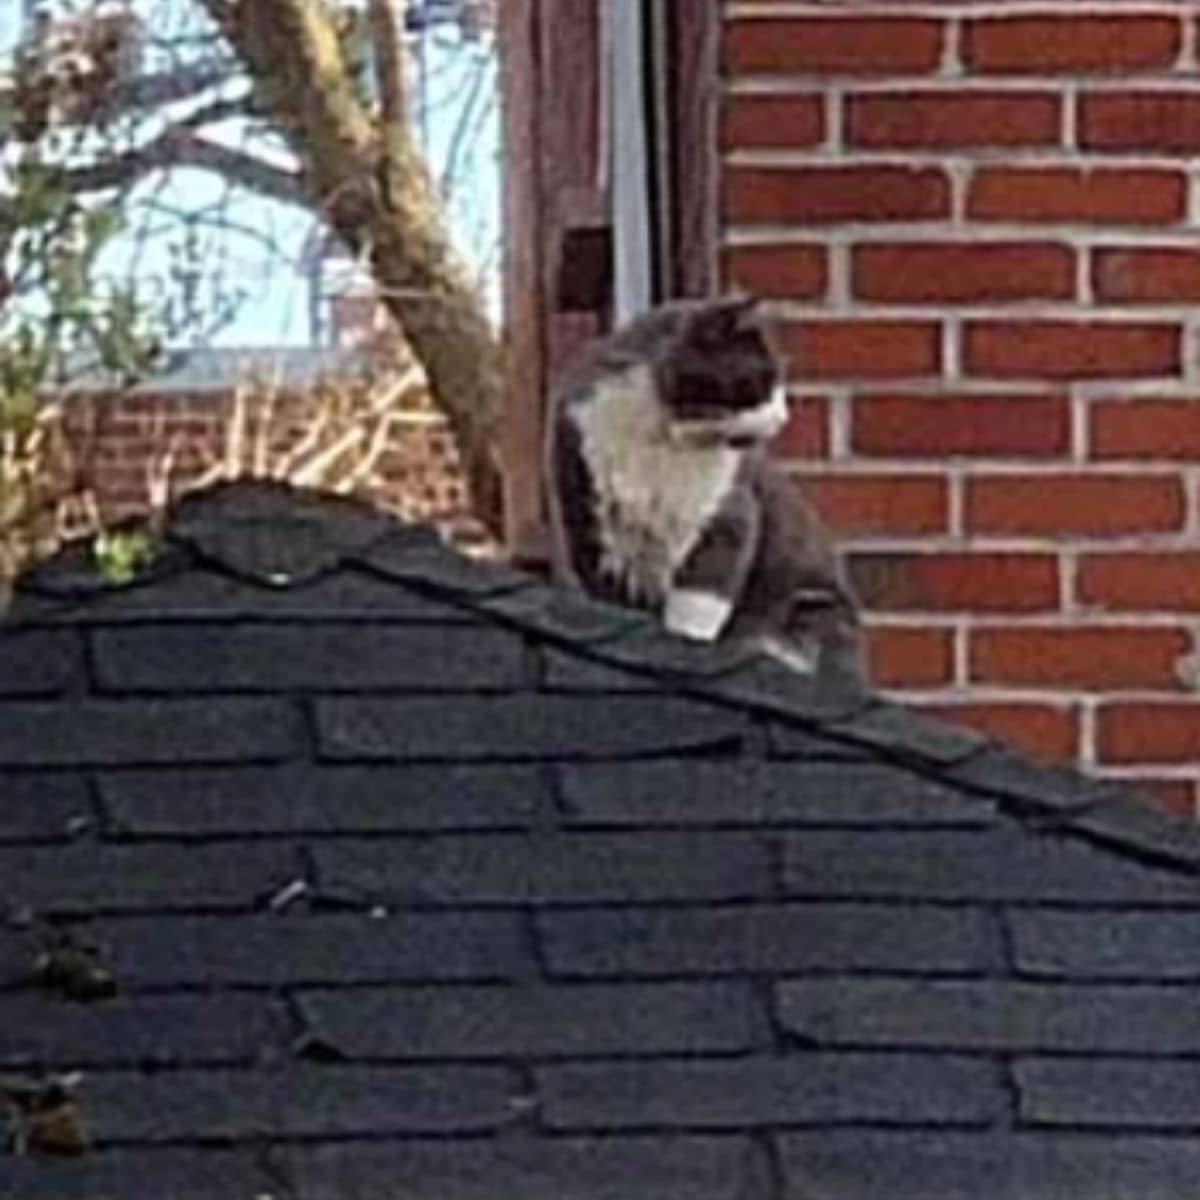 cat sitting on the roof